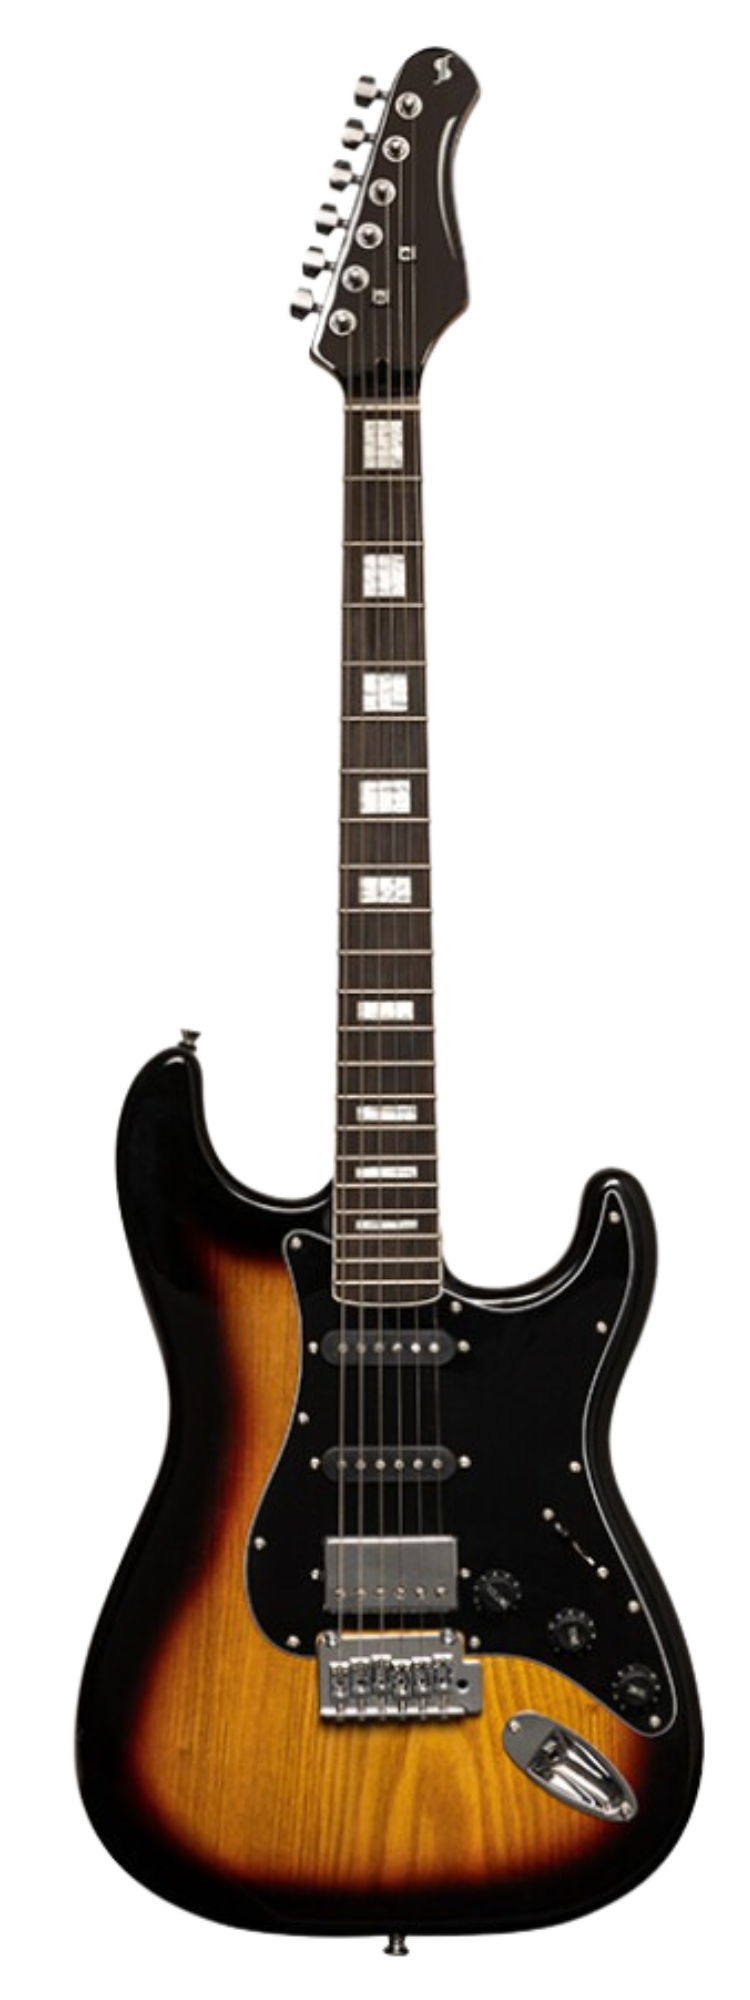 STAGG SES-60 Electric Guitar